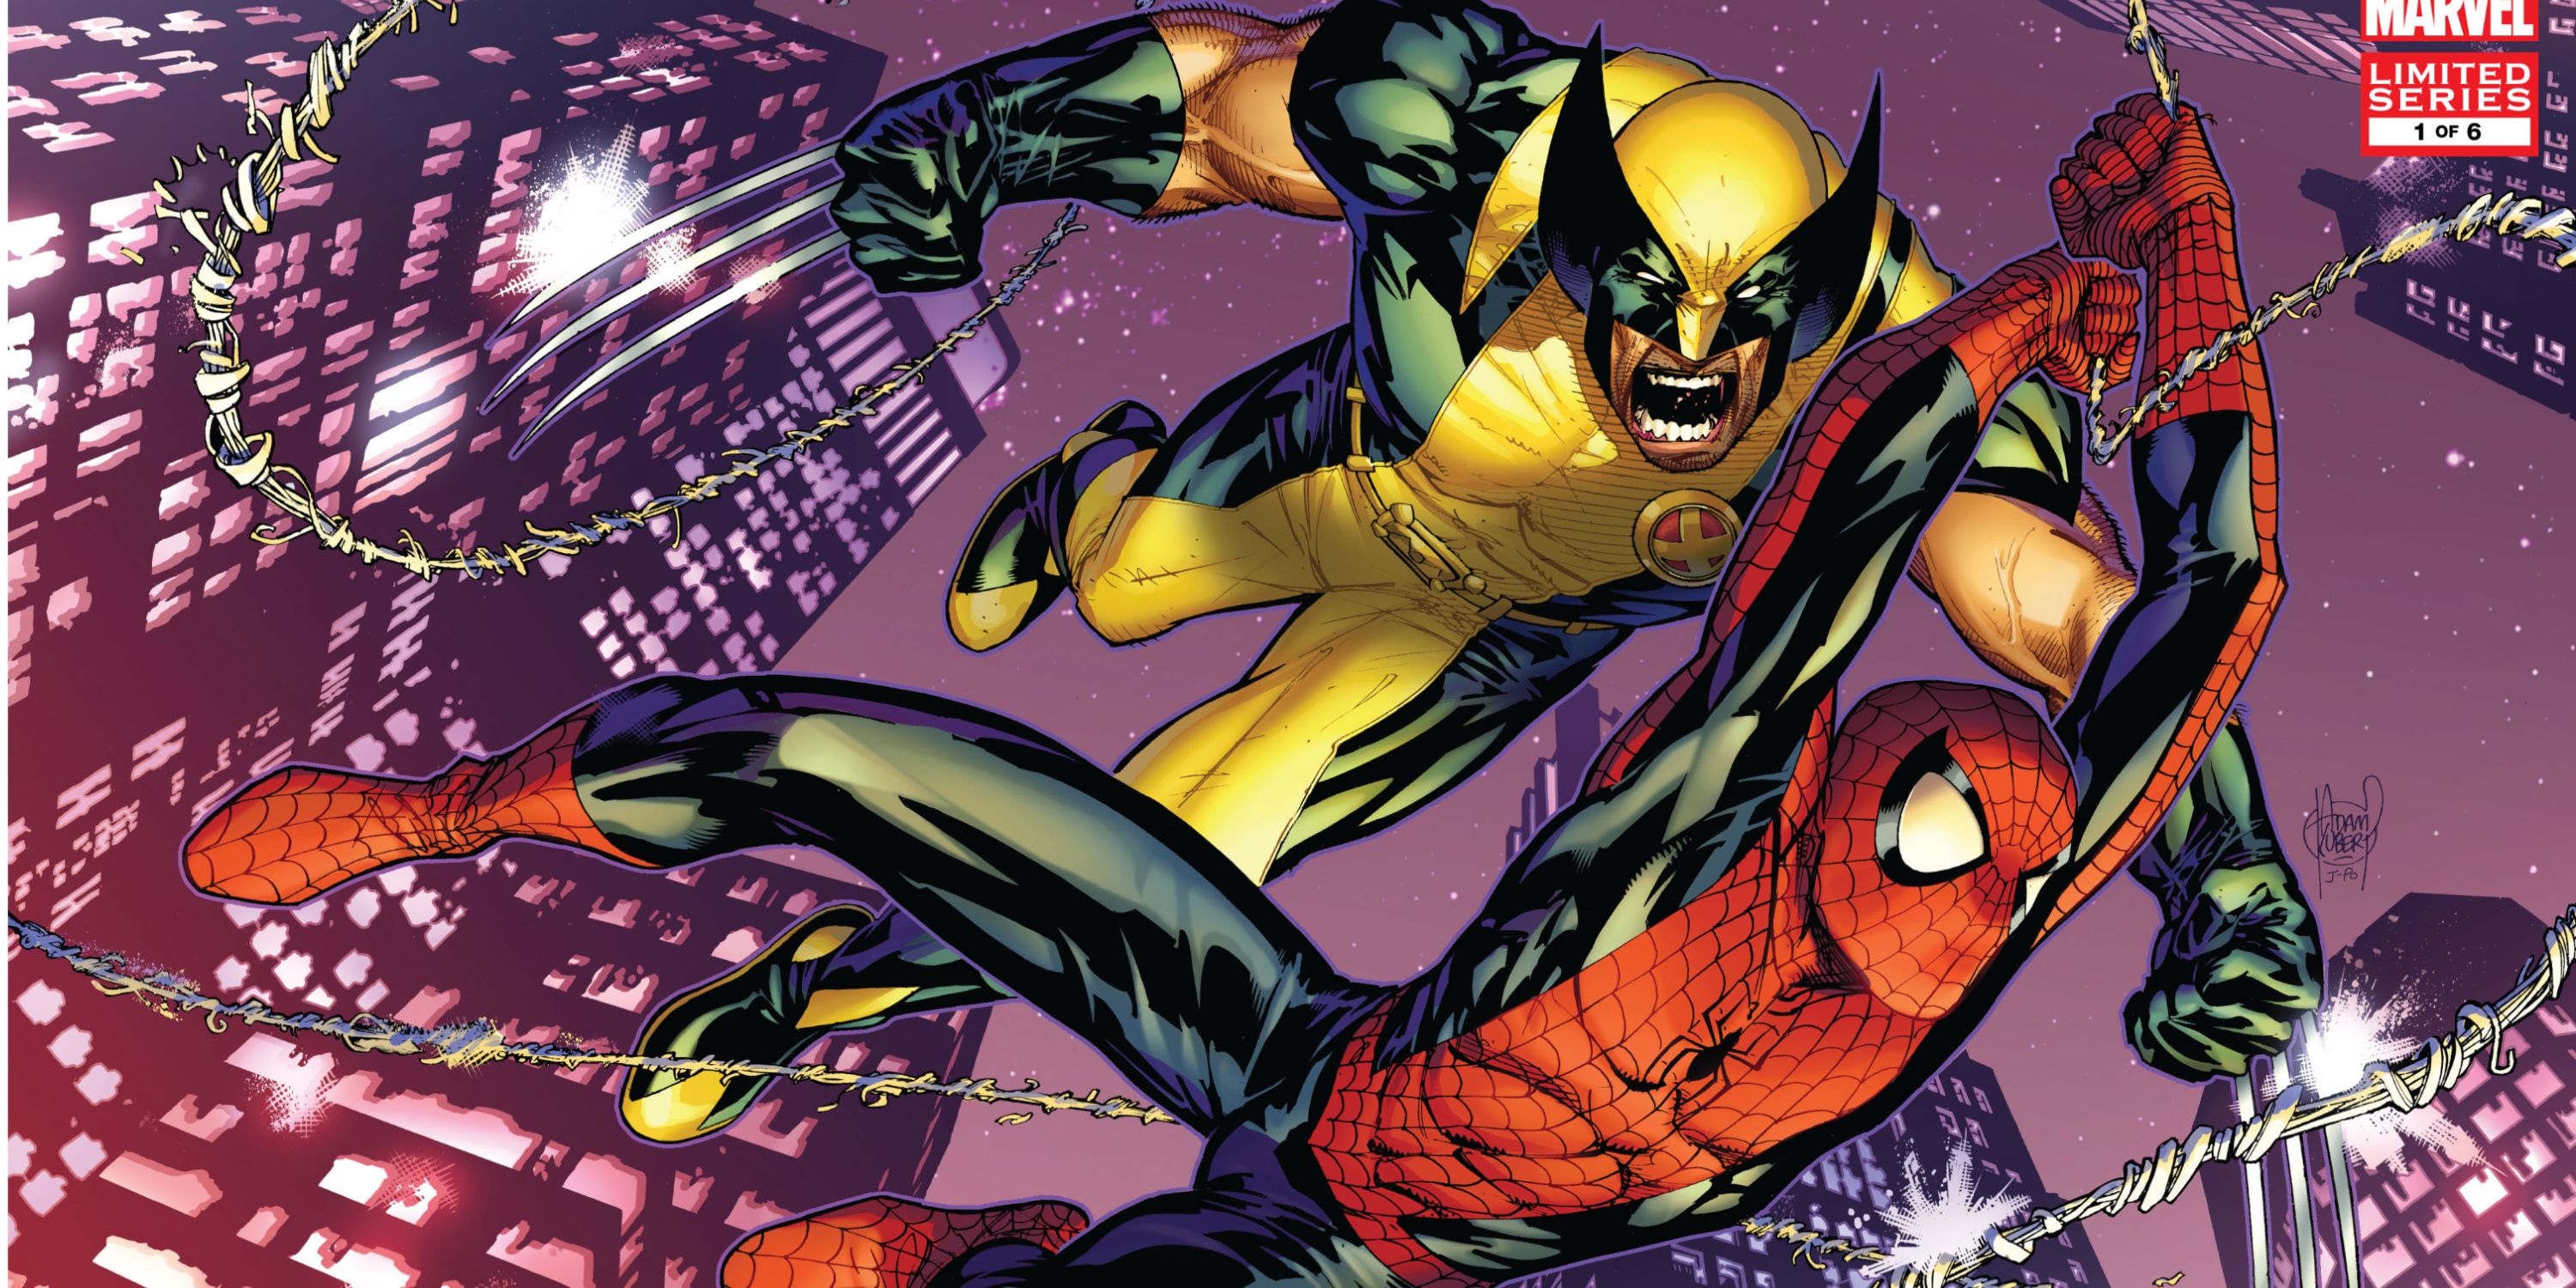 Astonishing Spider-Man and Wolverine from Marvel Comics